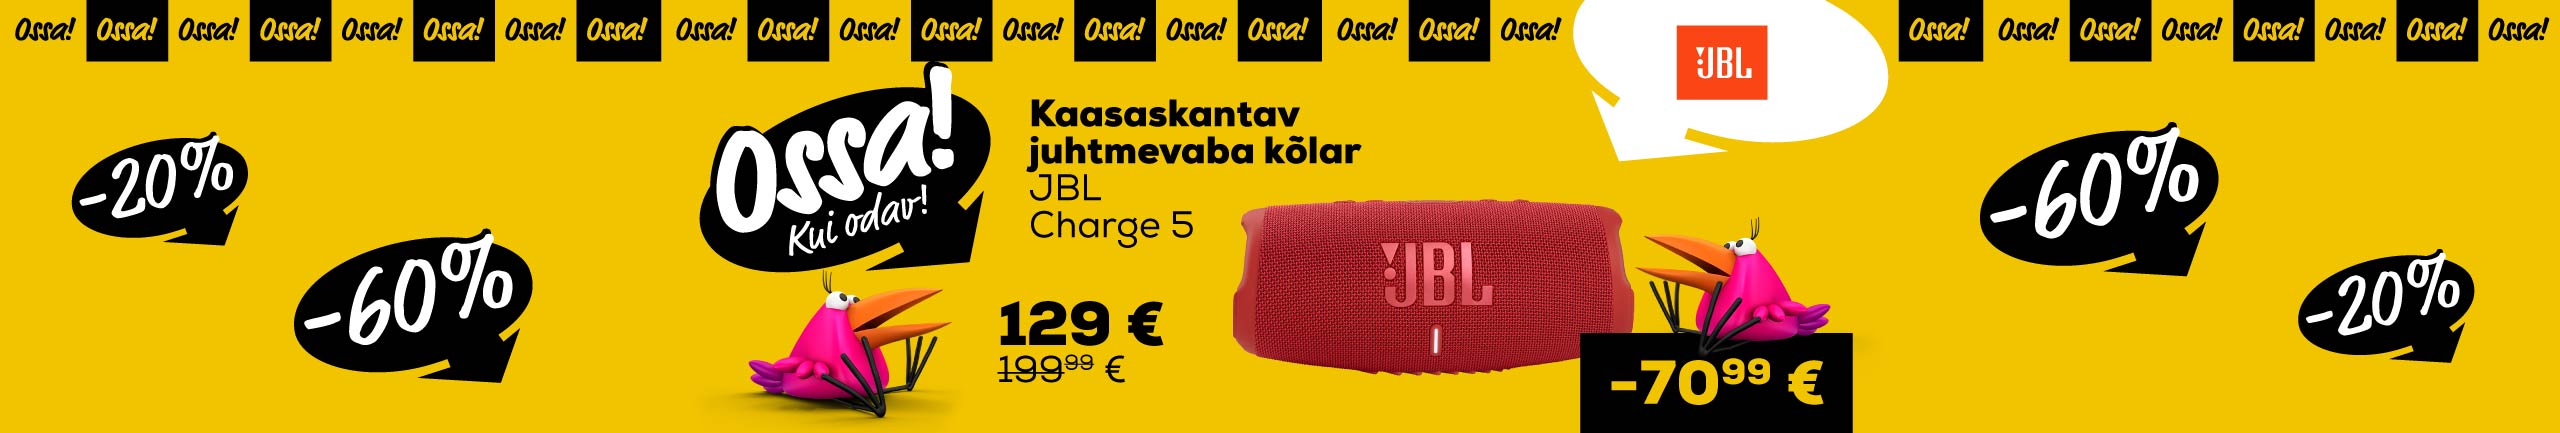 NPL Ossa extended! We added new products! Wireless portable speaker JBL Charge 5 